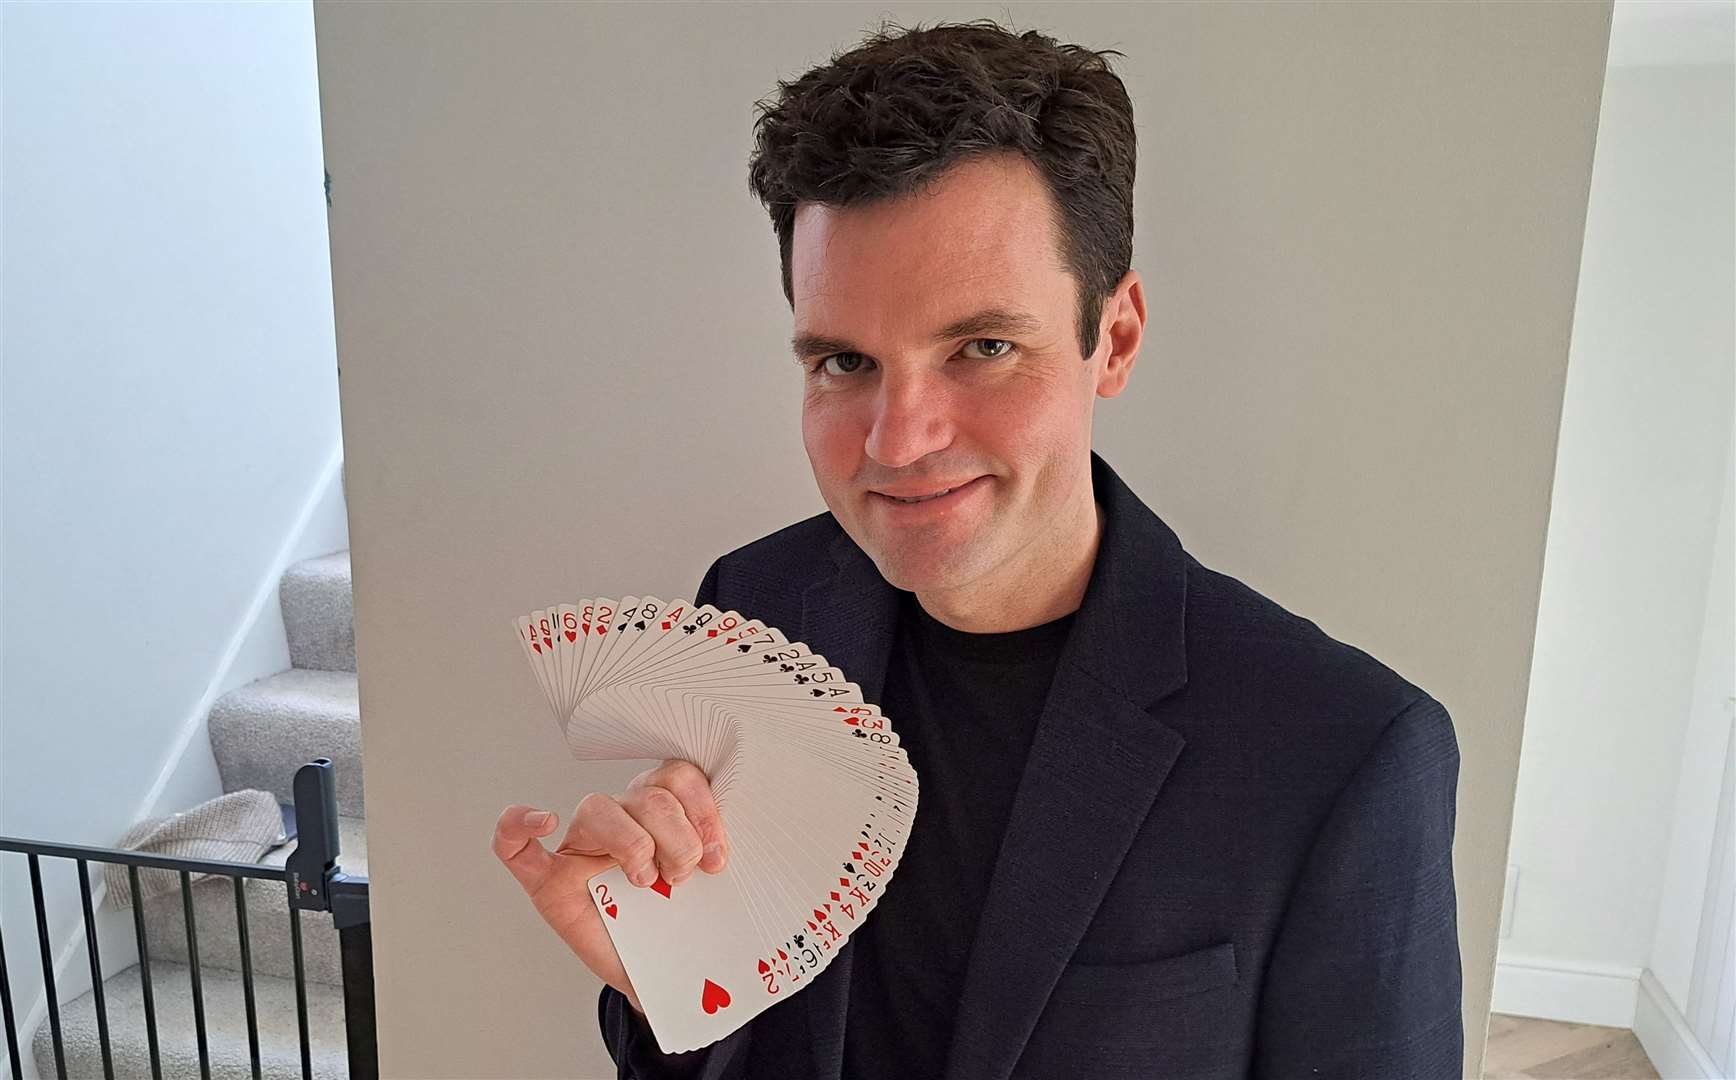 Ashford magician Chris Harding has amazing skills with playing cards